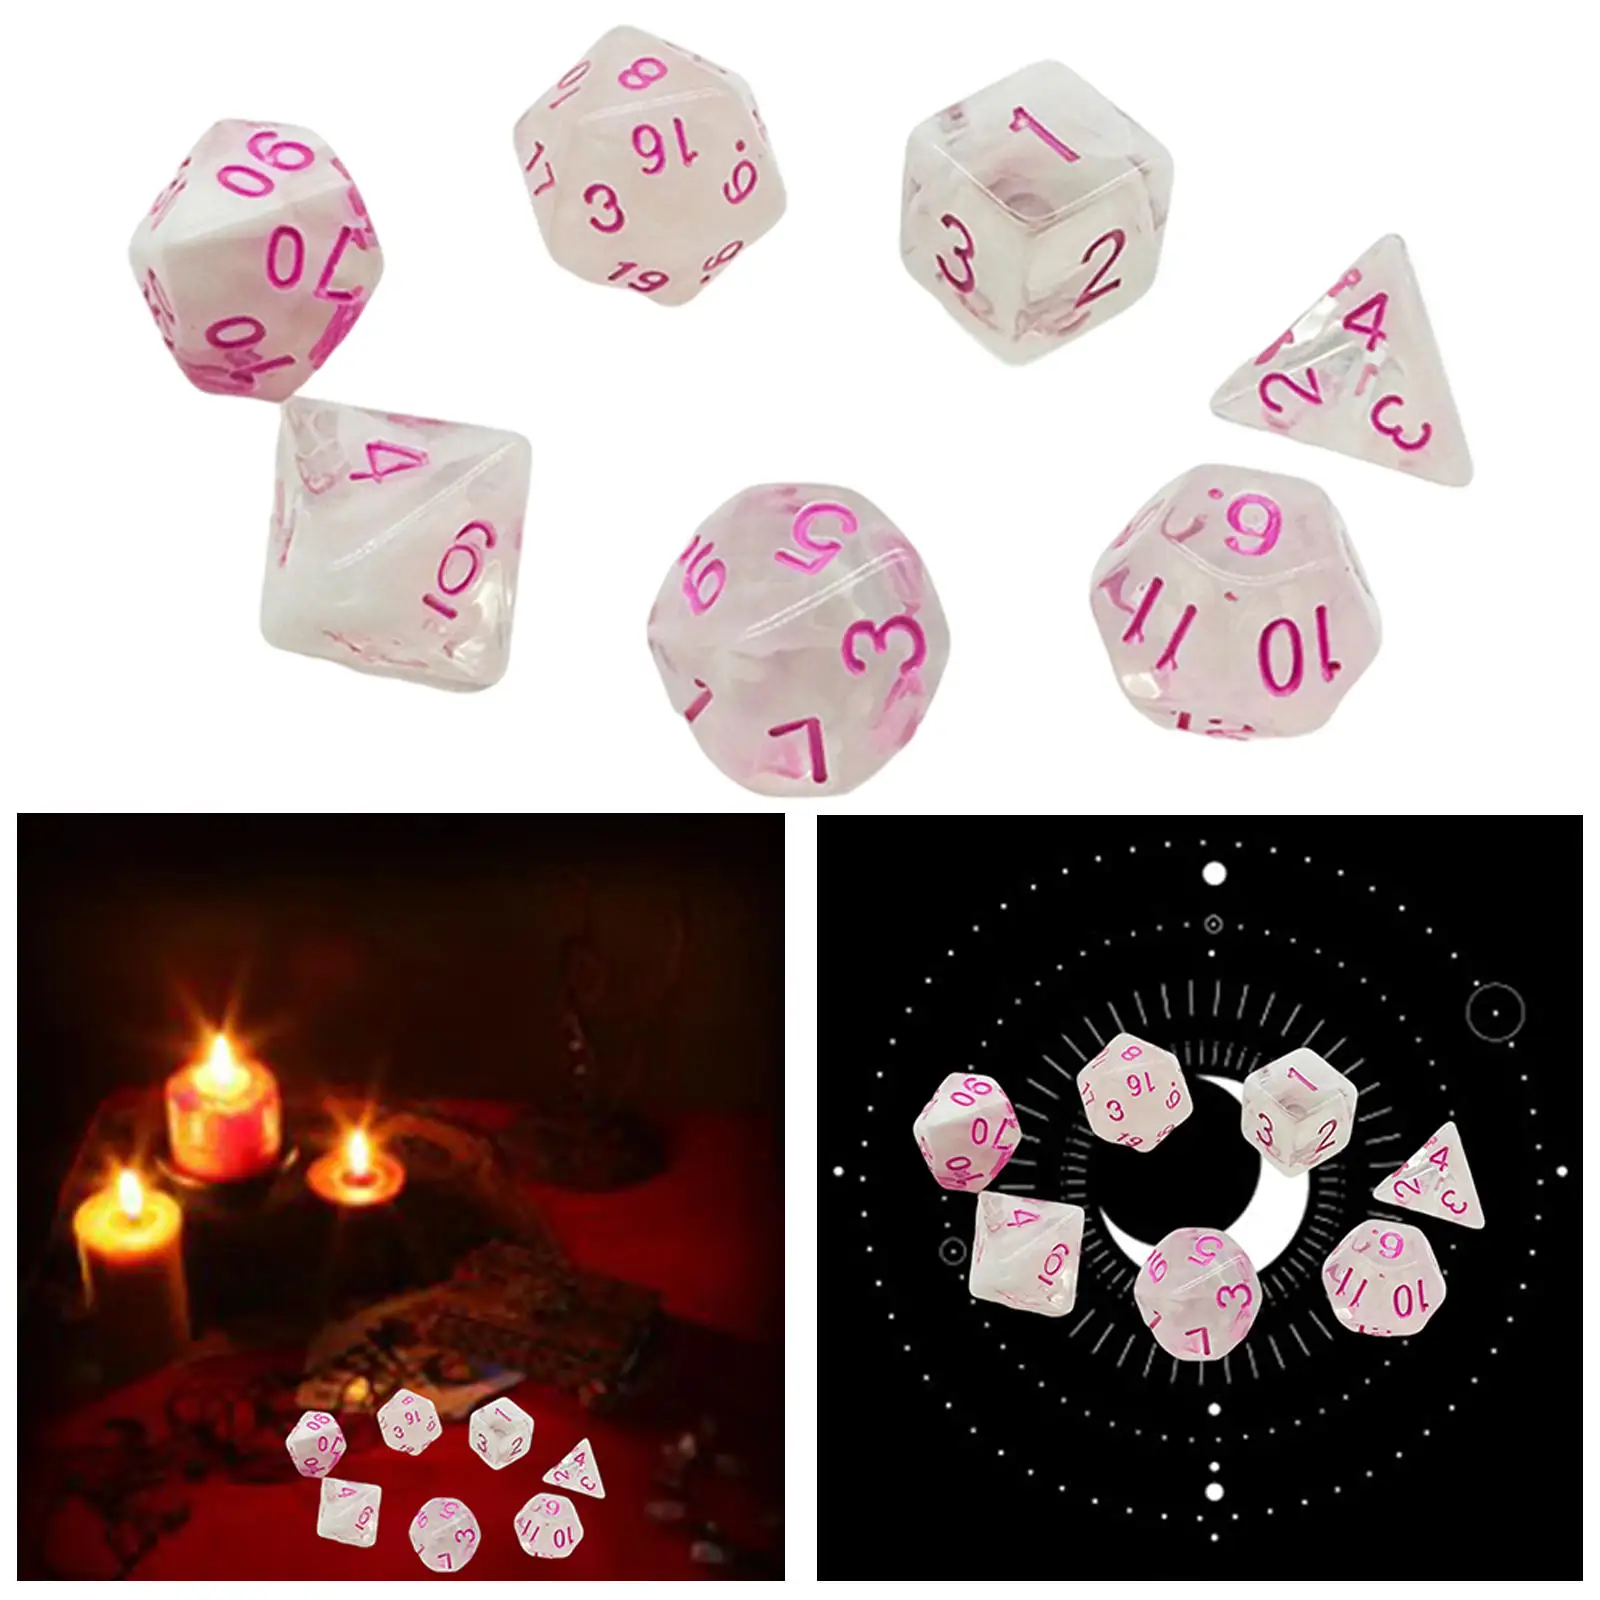 7 Pieces Multi Sides Dice,TRPG DND Games,Role Playing Game Party Favor,Polyhedral Dice for DND RPG MTG Bar Toys Casino War Game